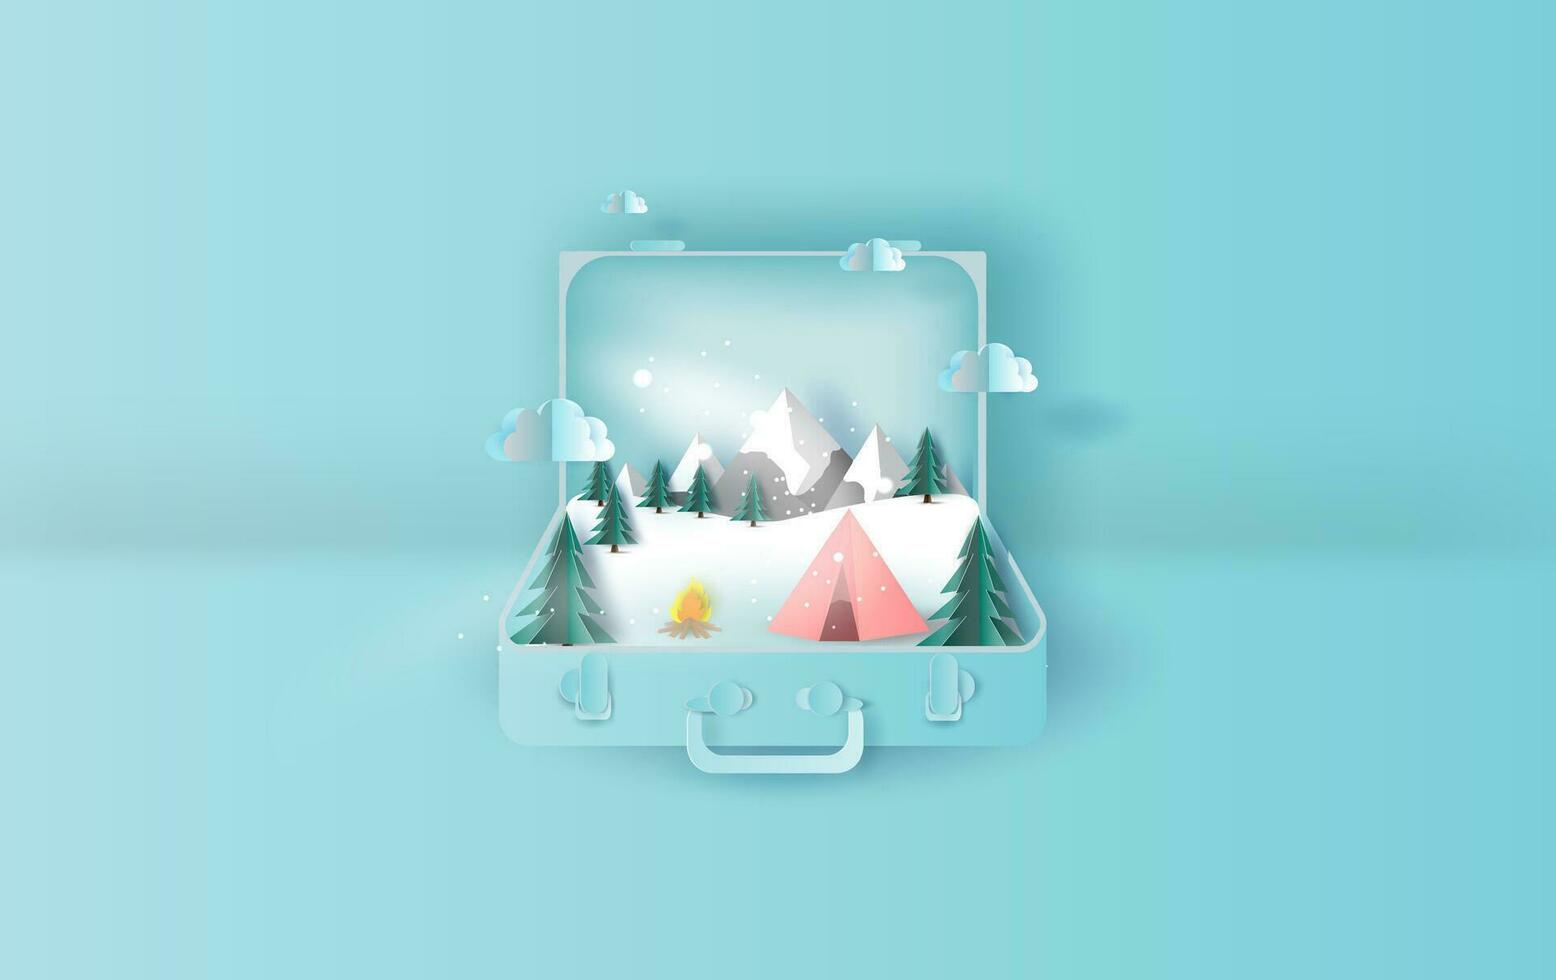 illustration of Travel holiday tent camping trip winter suitcase concept.Graphic for snowfall  winter season paper cut and craft style.Creative design idea for christmas pastel background. vector. vector